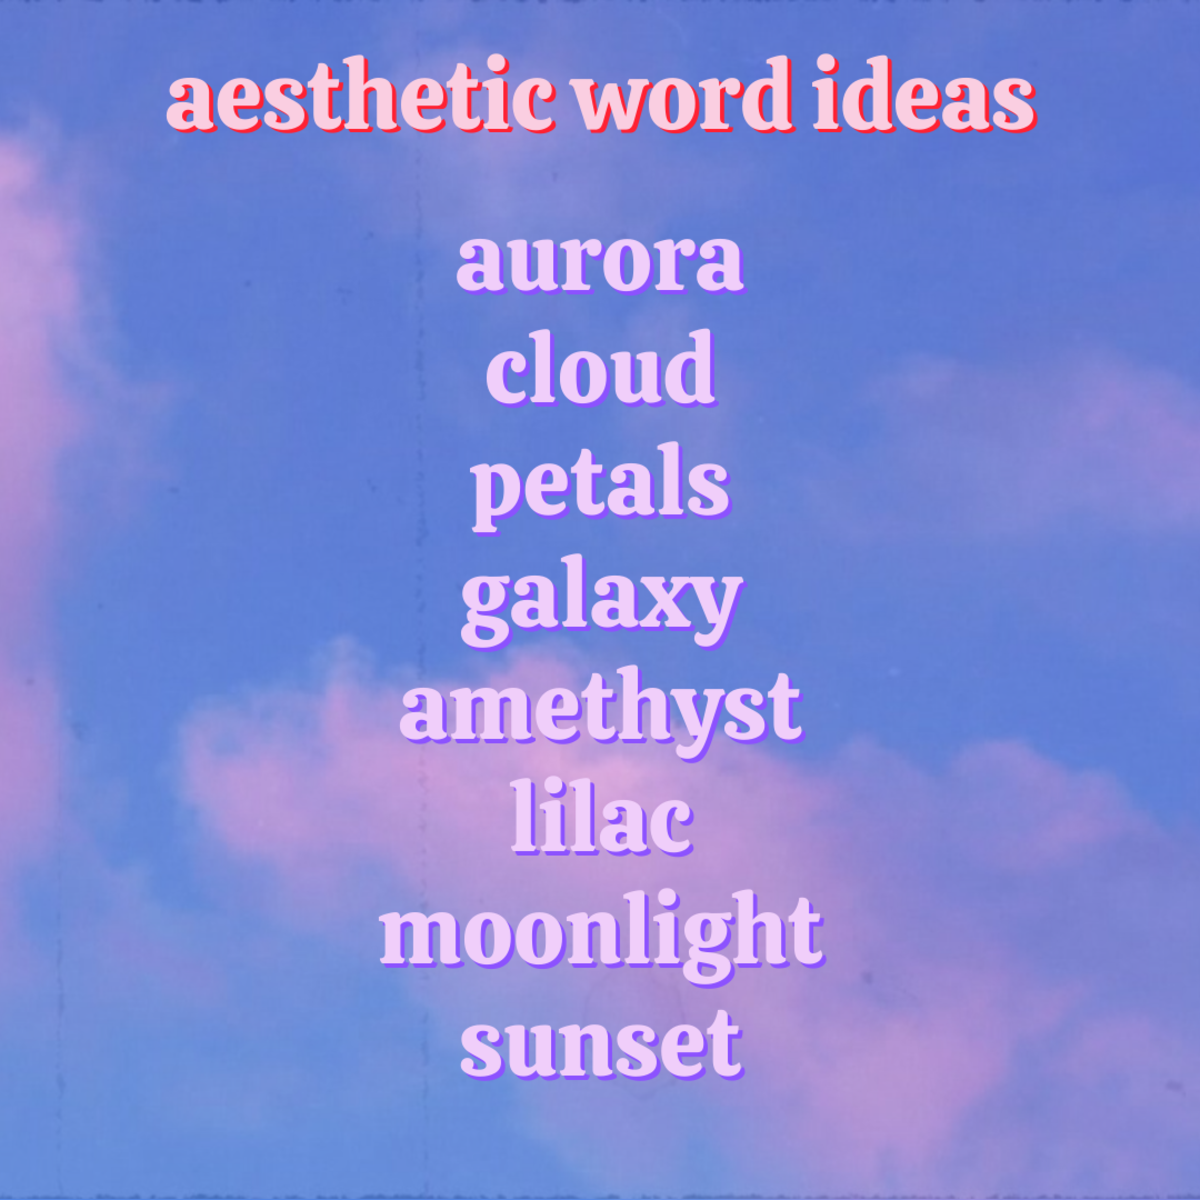 Here are more aesthetic word ideas to inspire you!